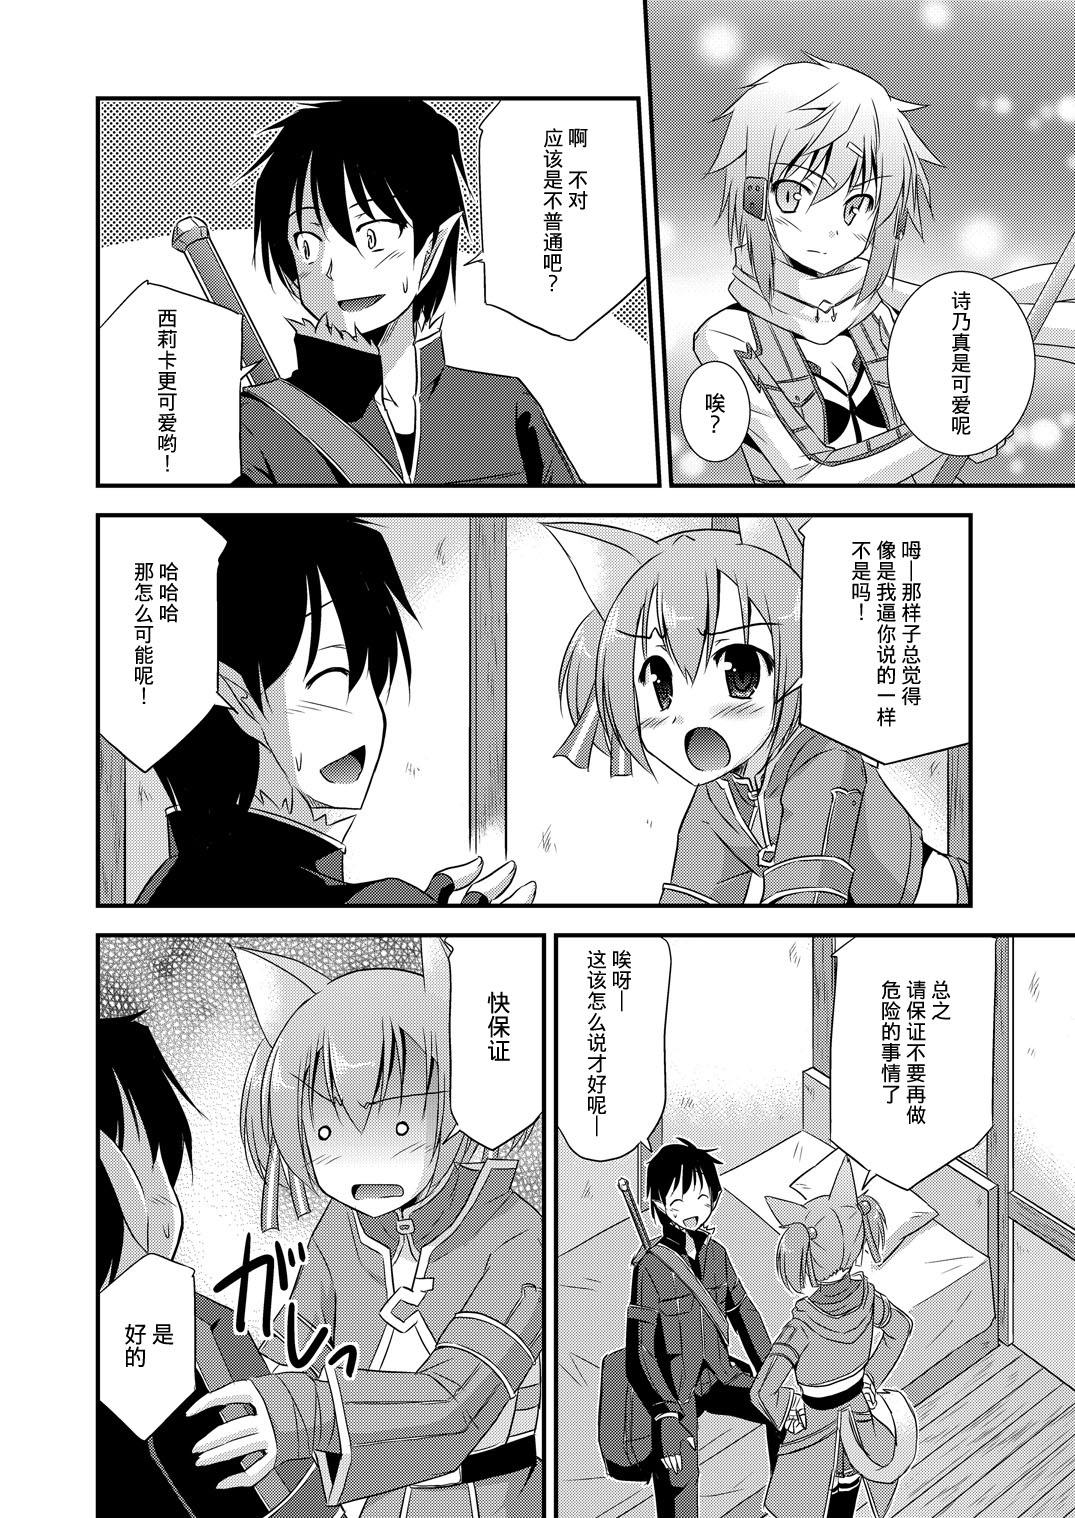 Rough Porn Silica Route Offline Phantom Parade After - Sword art online Lovers - Page 5